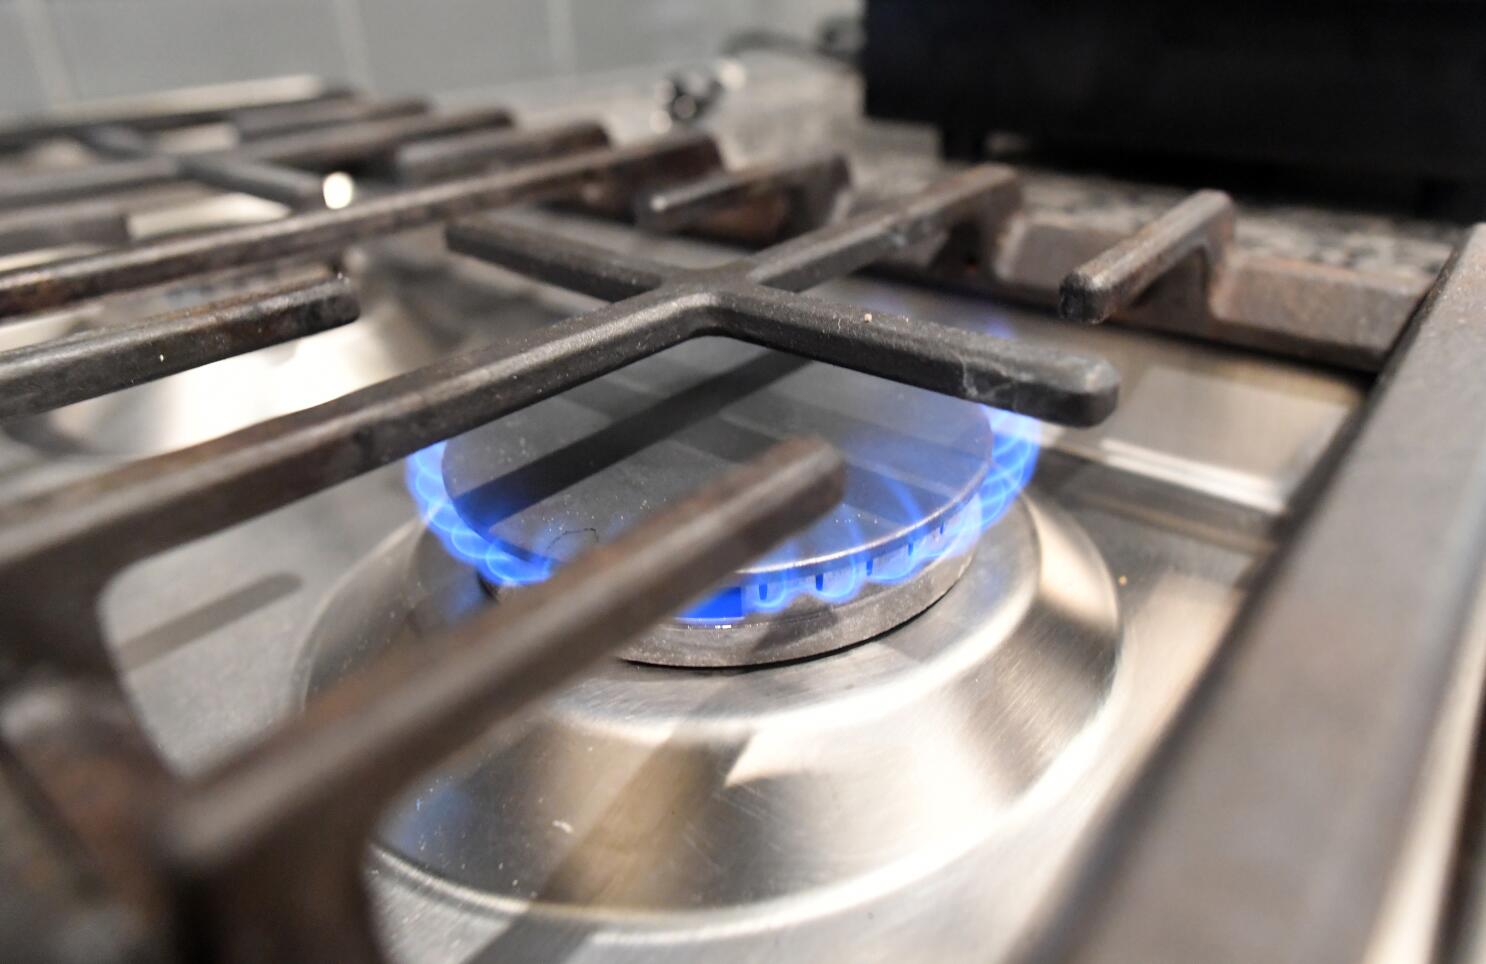 Can you switch from a gas stove to electric?